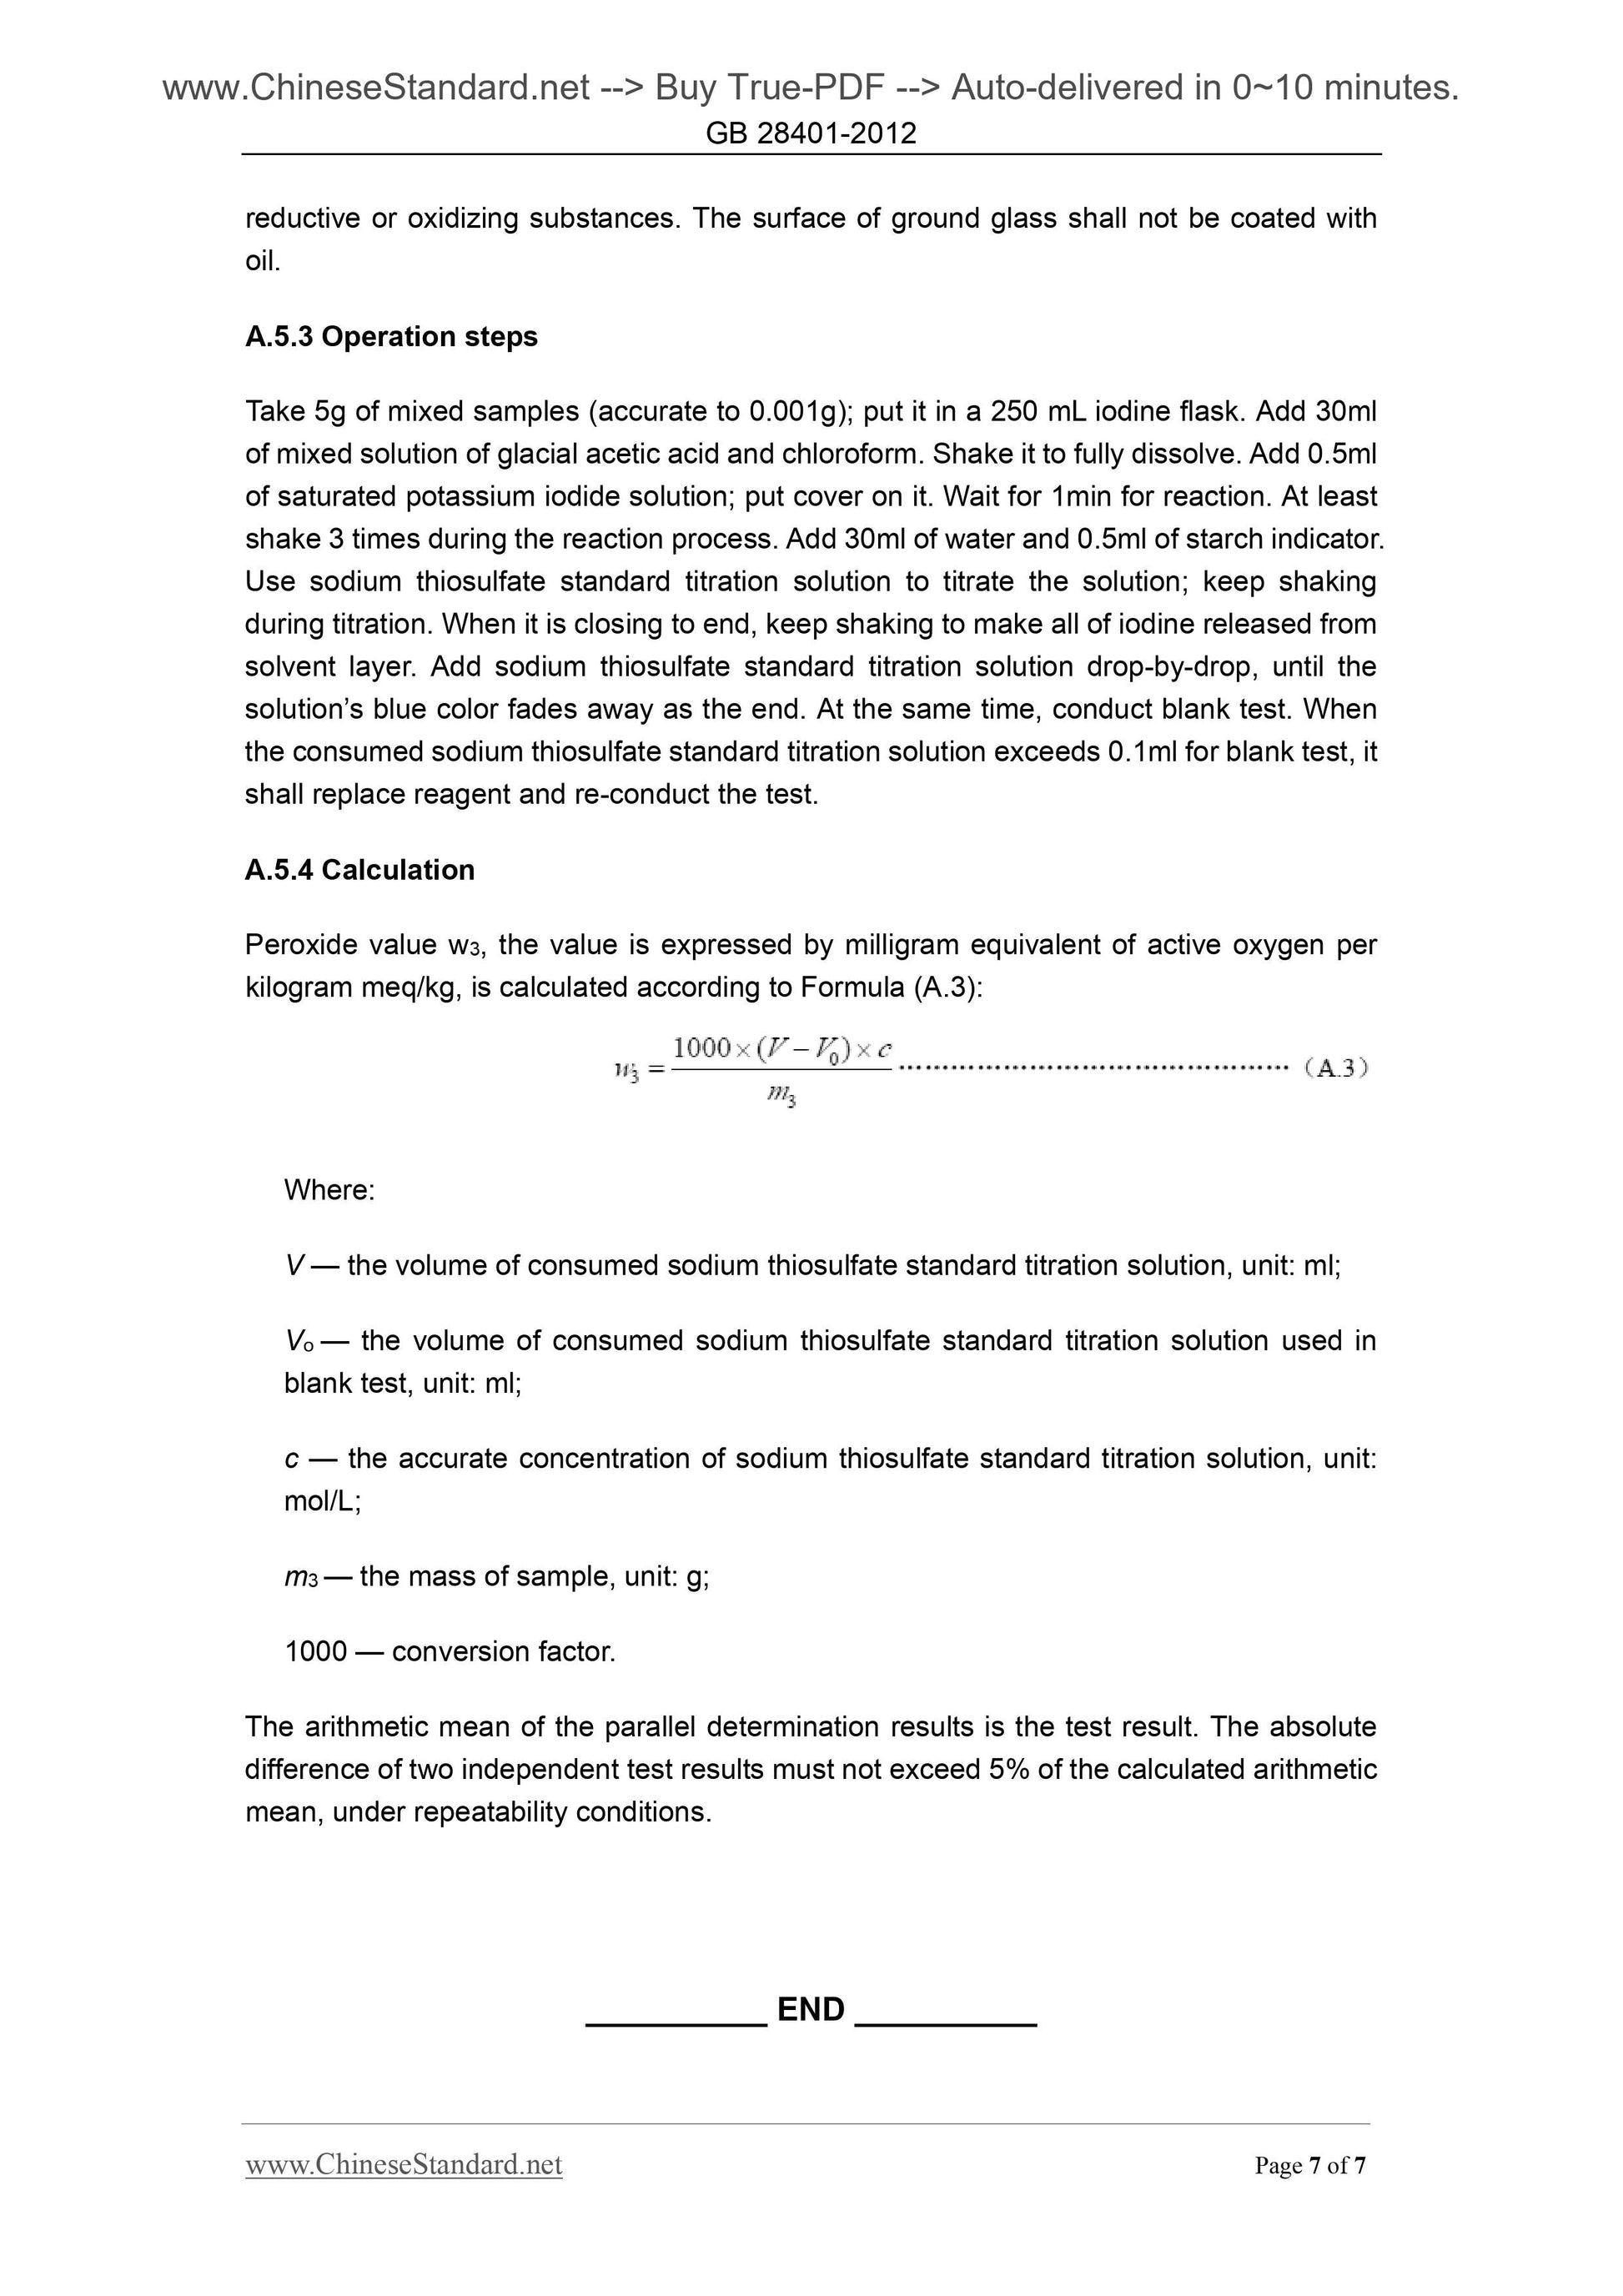 GB 28401-2012 Page 4